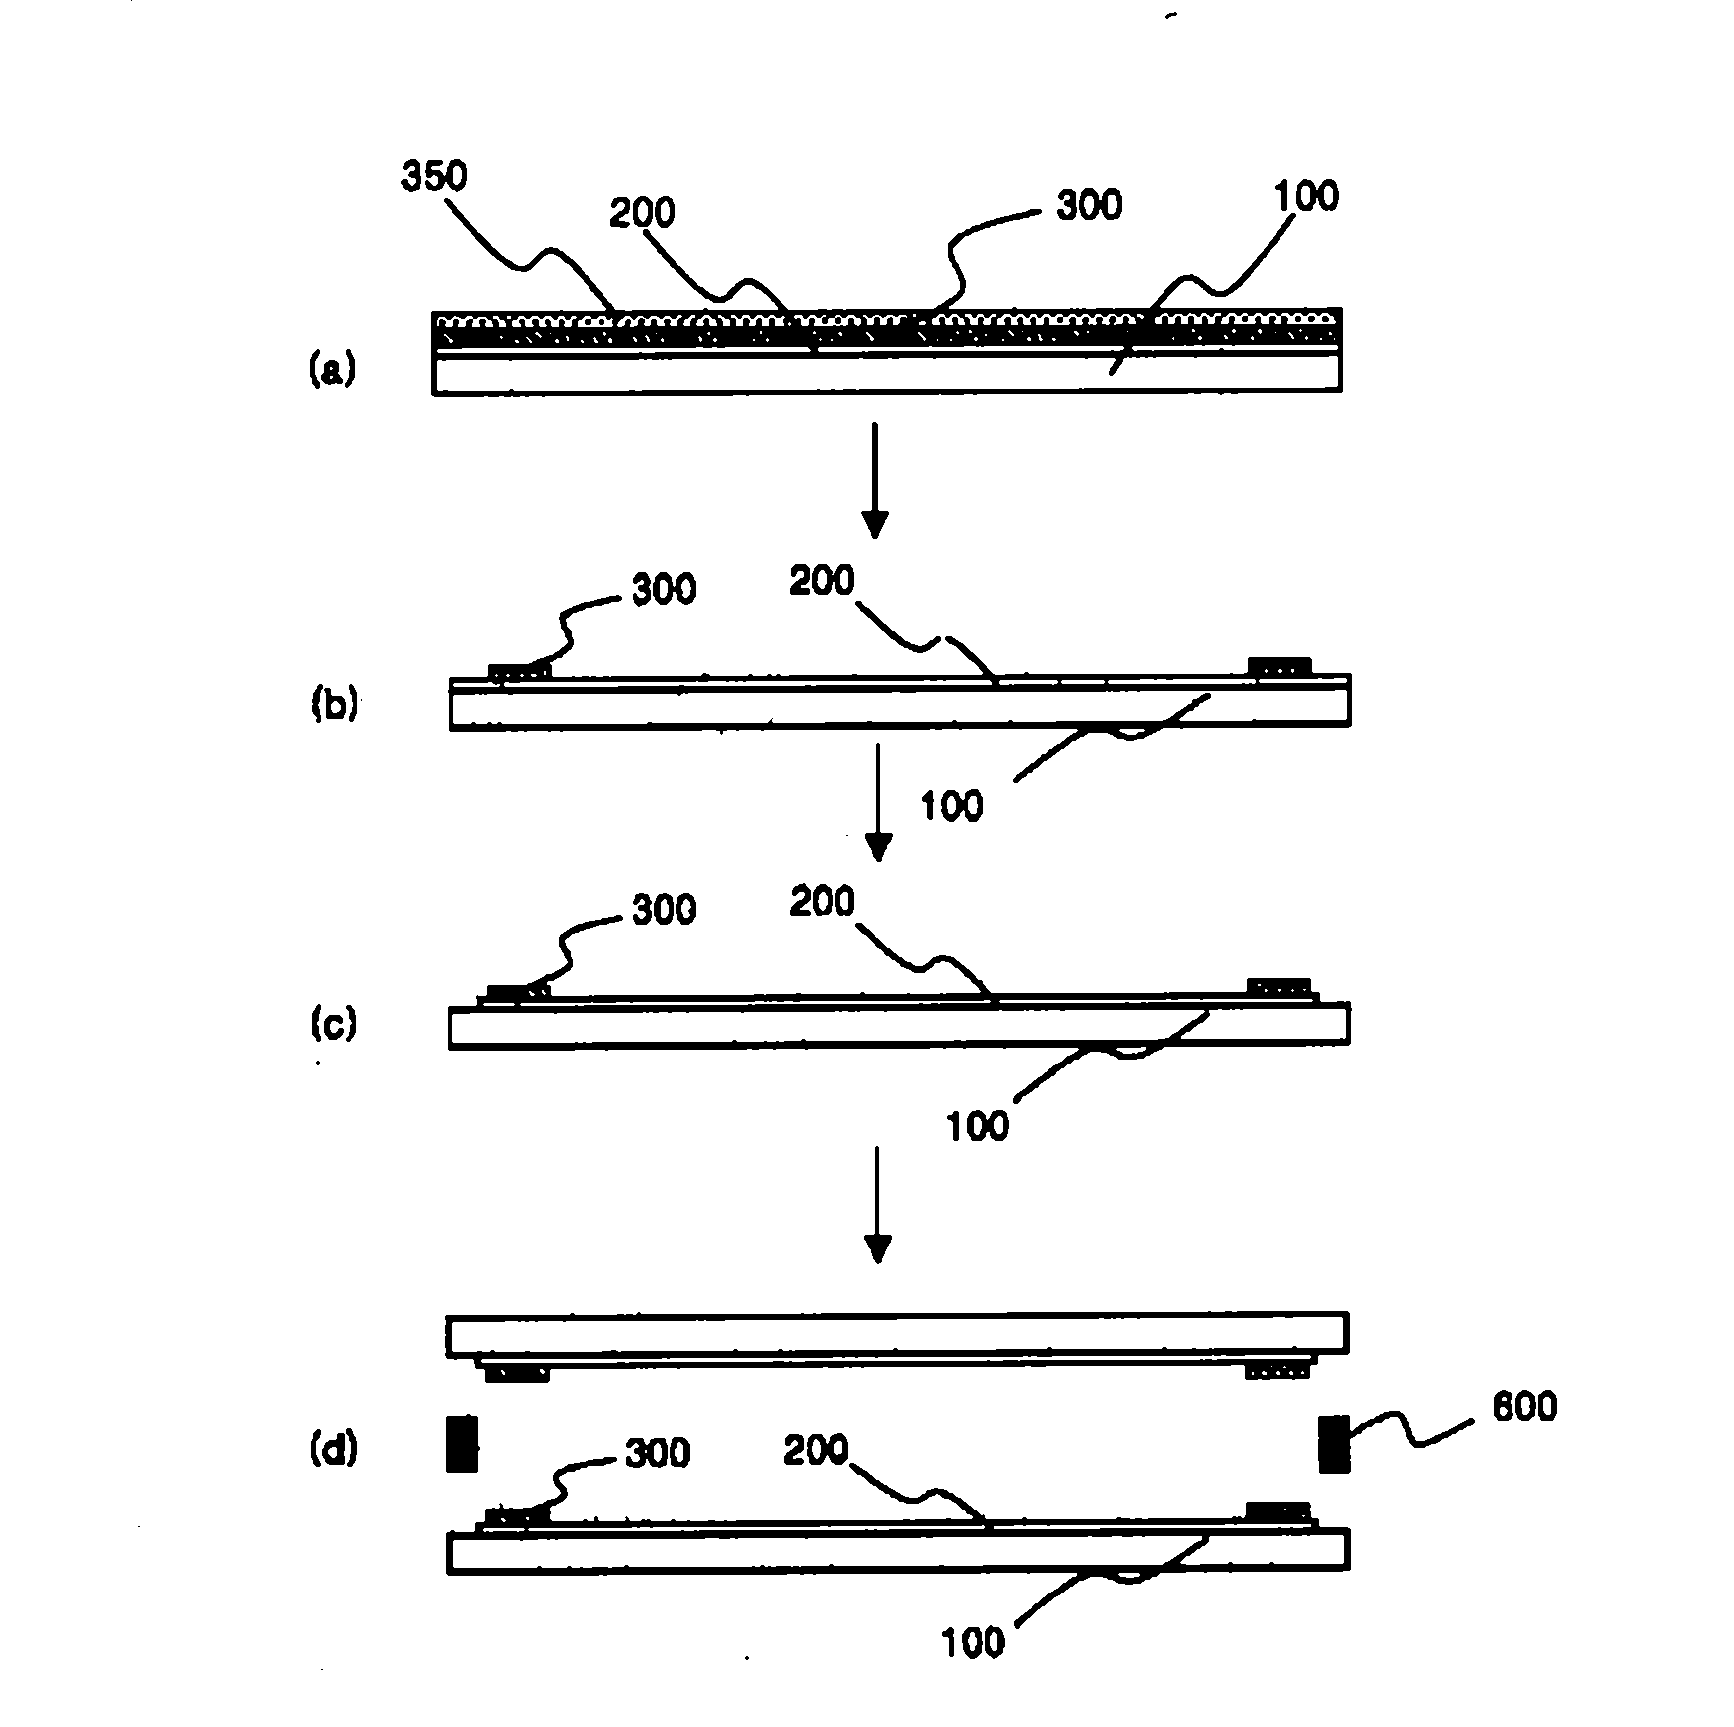 Gasket for manufacturing touch panel, method of manufacturing touch panel using the same, and touch panel manufactured by the method